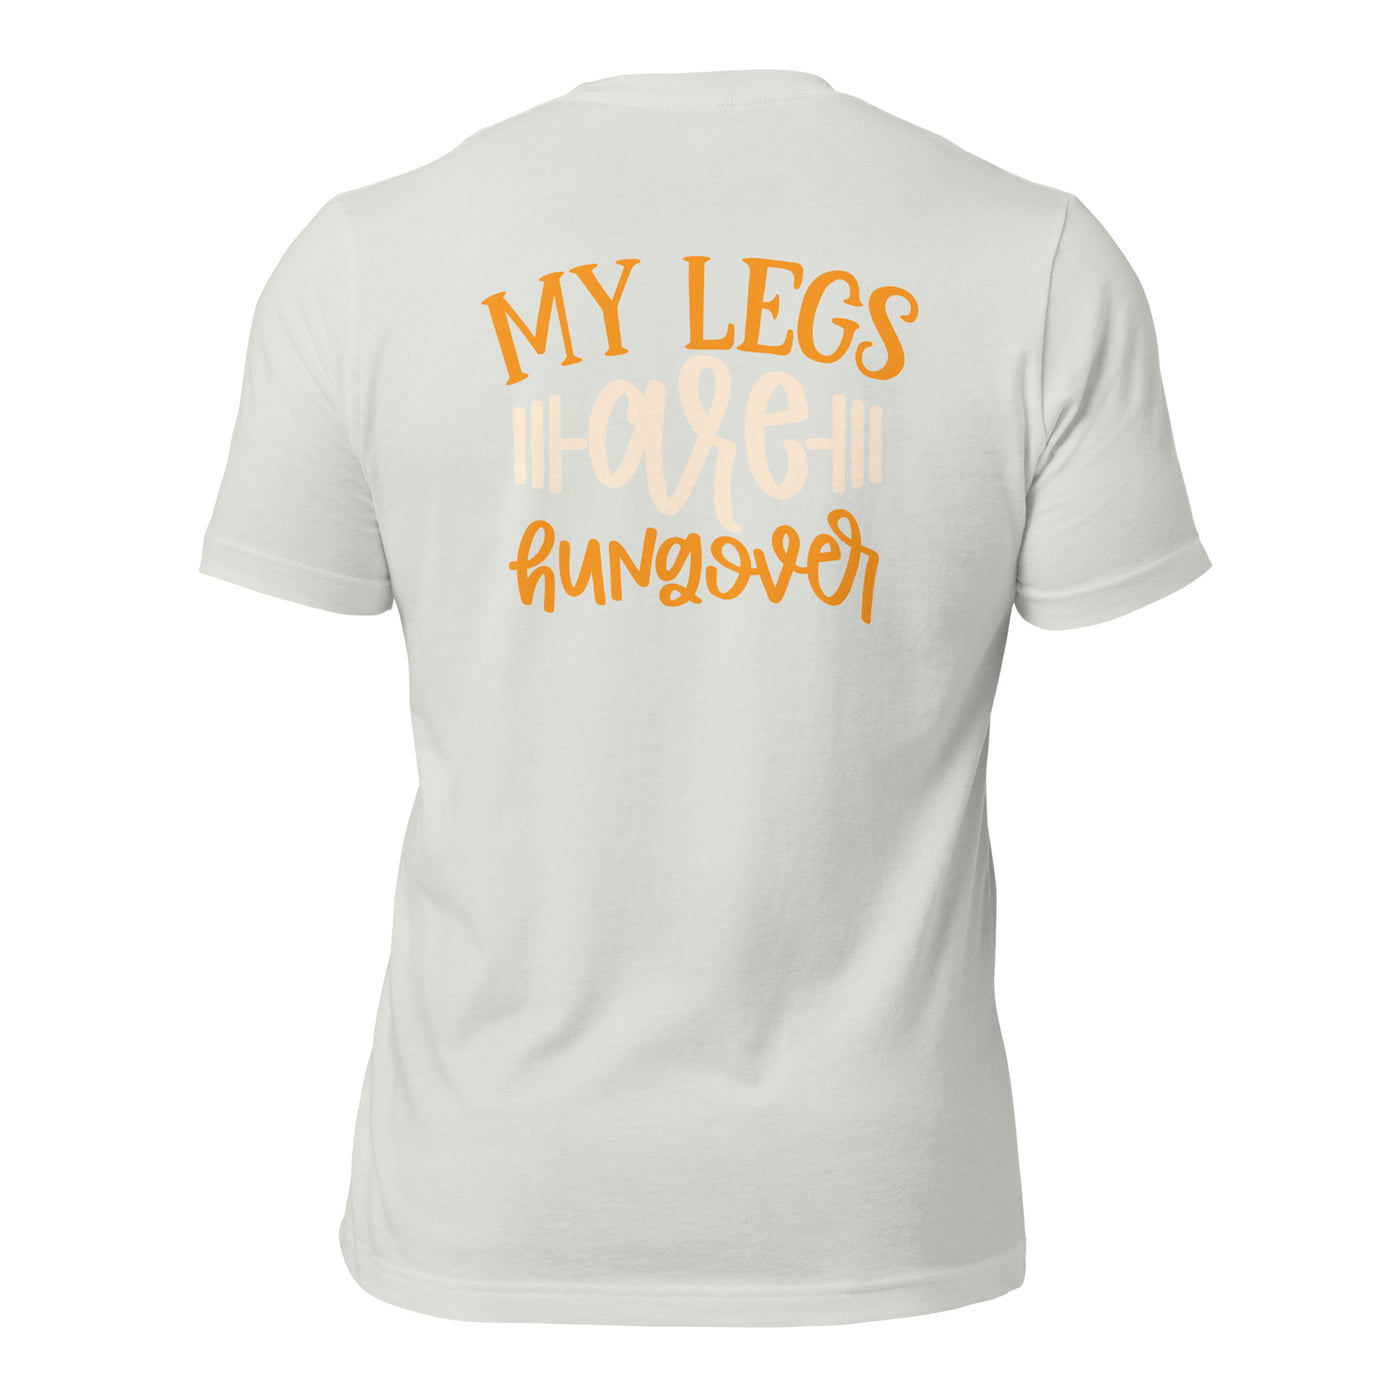 My Legs are Hungover - Unisex t-shirt ( Back Print )